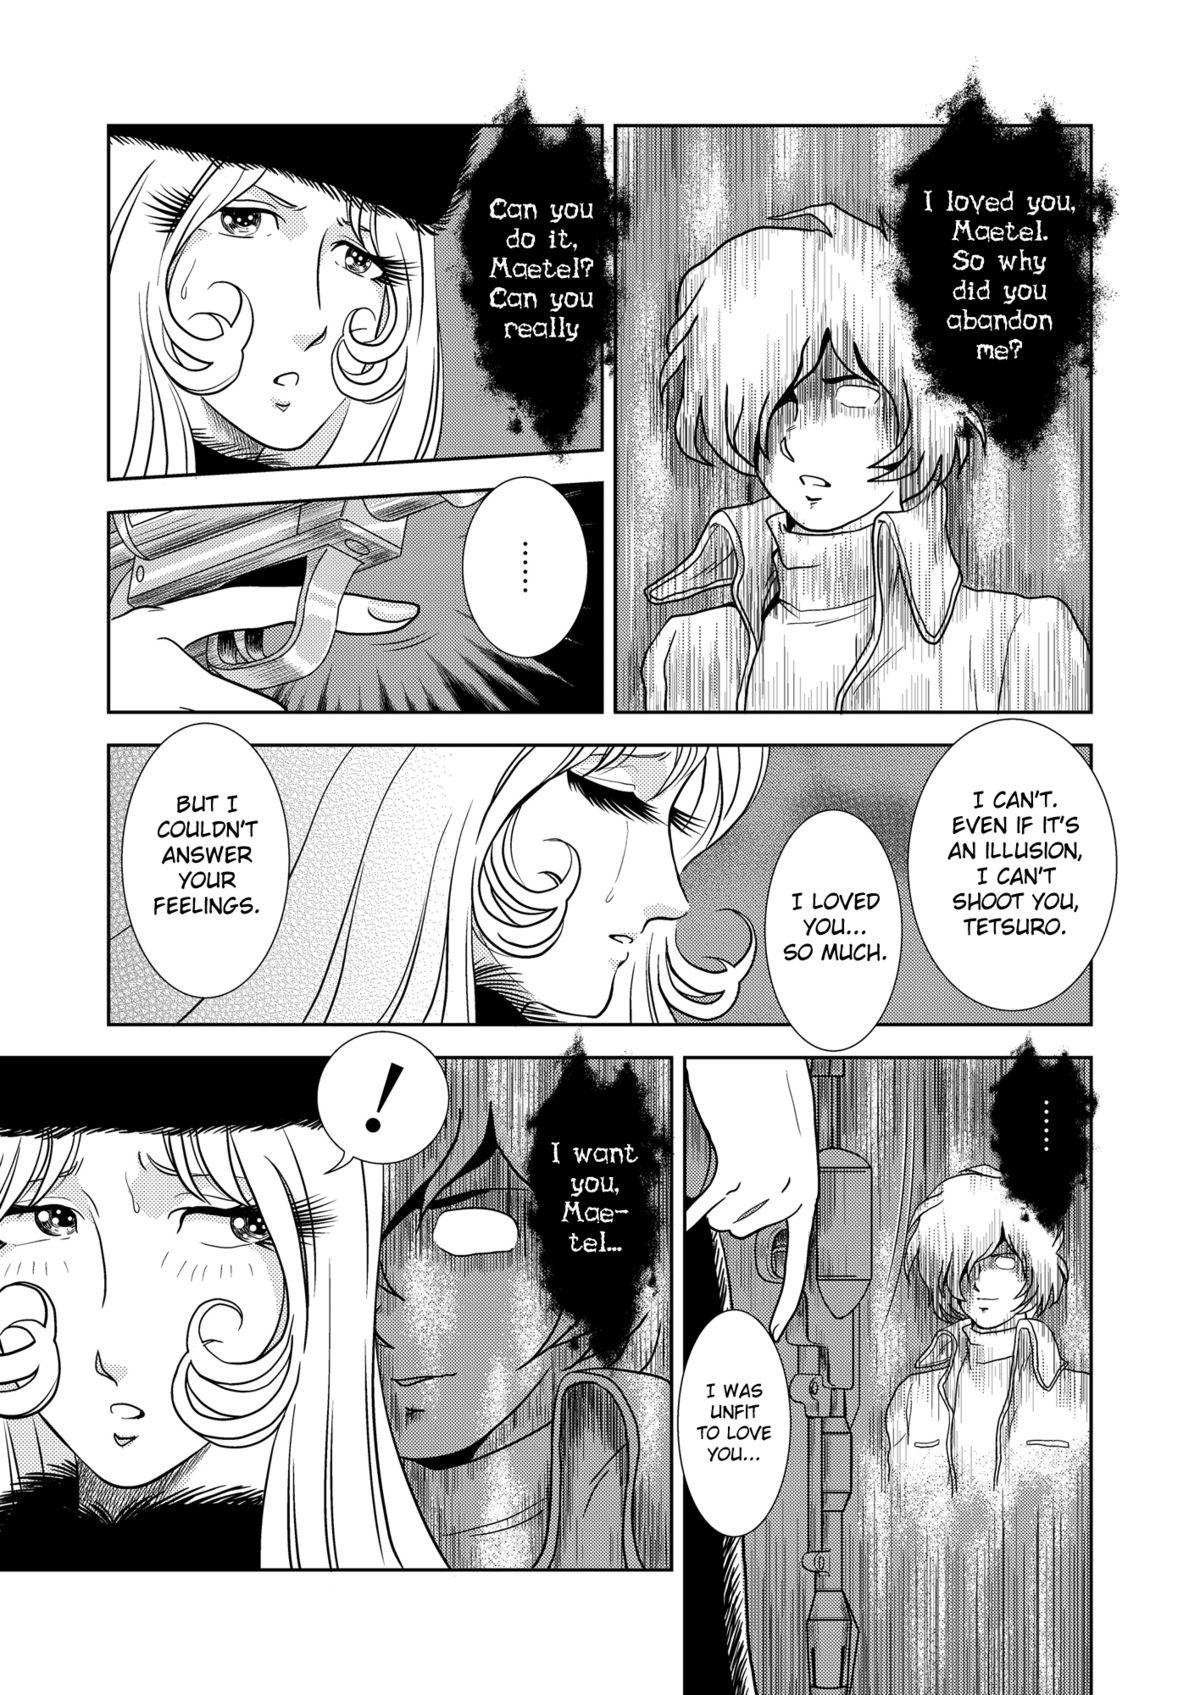 Cum Swallow Maetel Story - Galaxy express 999 Style - Page 7